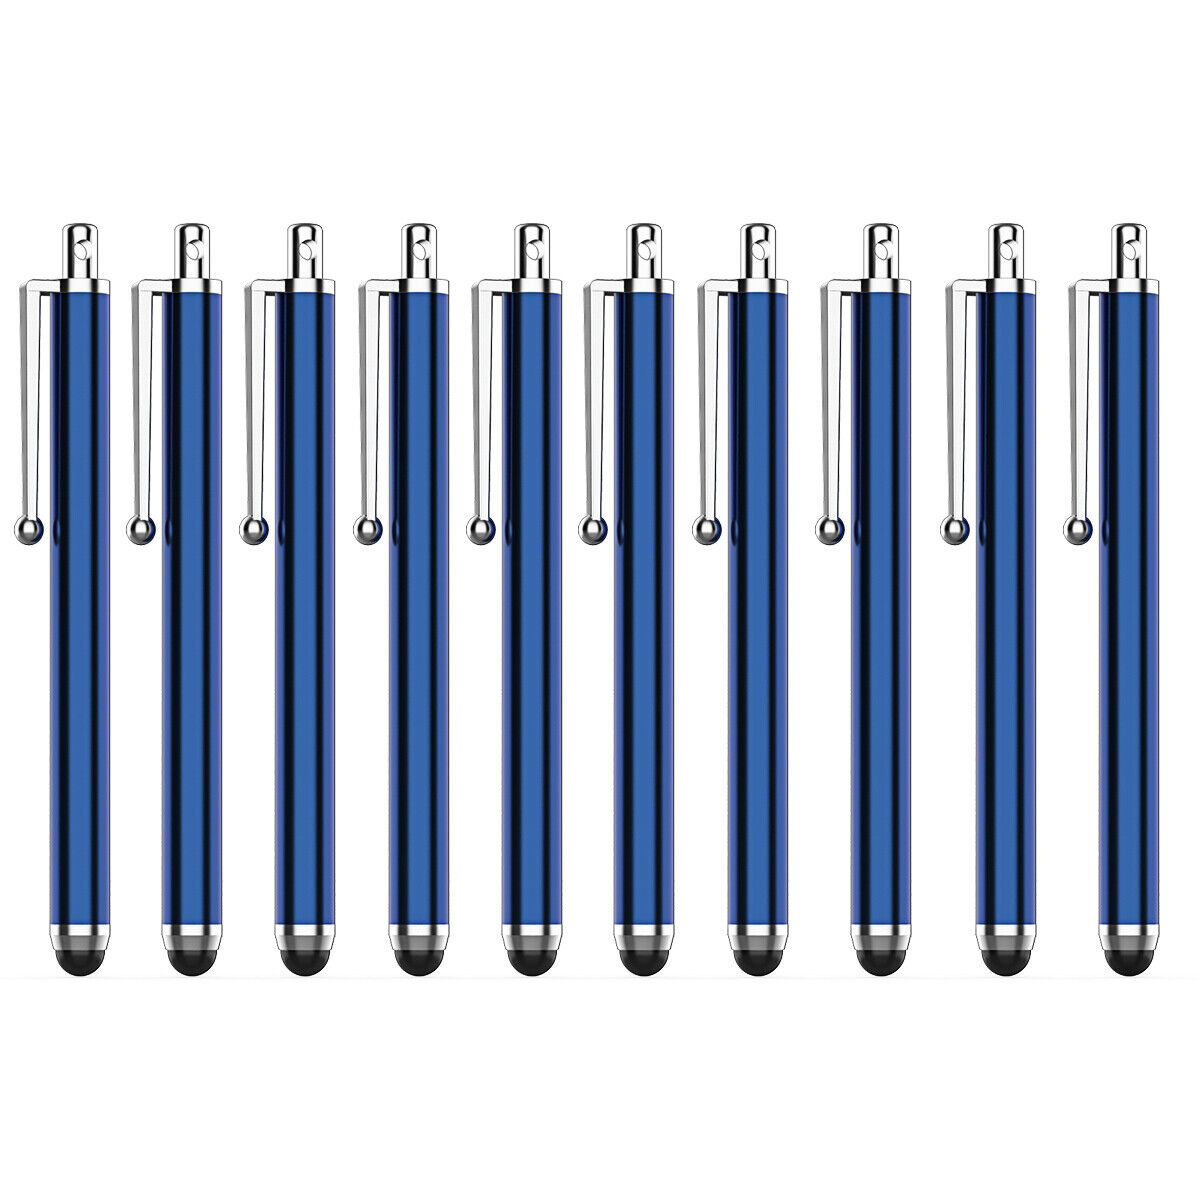 Universal 10pcs Metal Stylus Pen Touch Screen For Cell Phone Tablet iPod iPad PC